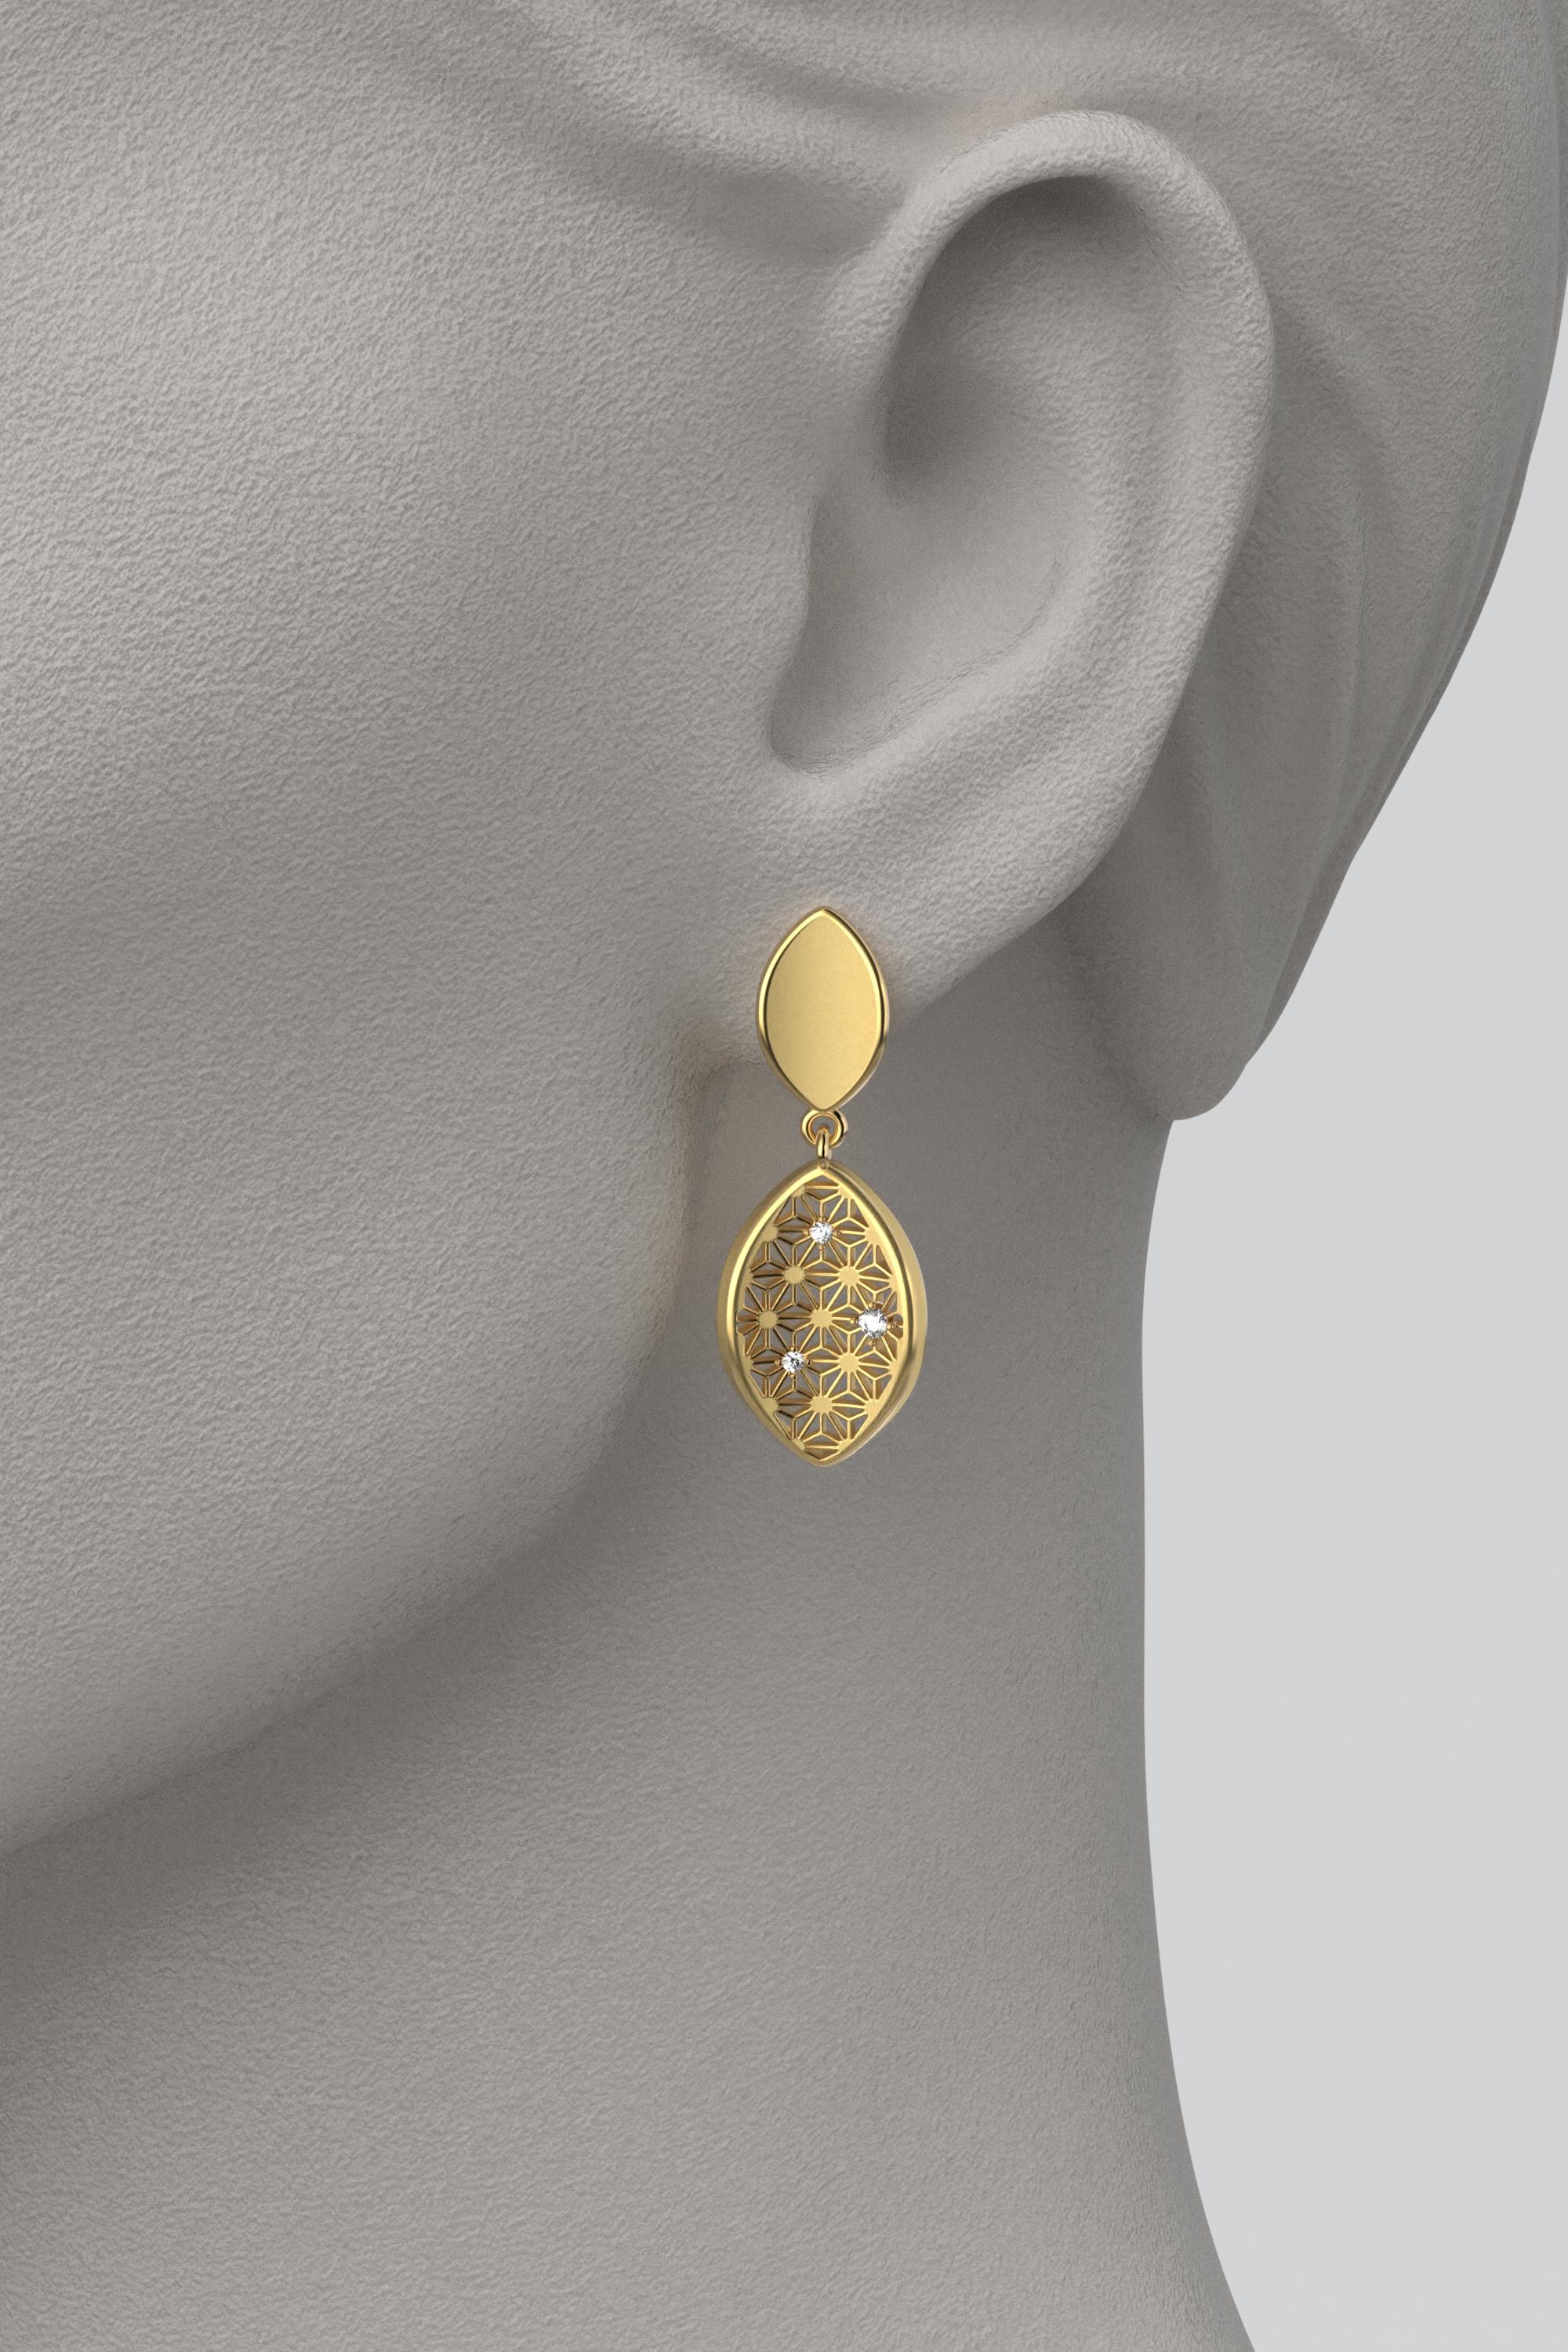 Brilliant Cut Italian Diamond Earrings in 18k Solid Gold with Japanese Sashiko Pattern For Sale